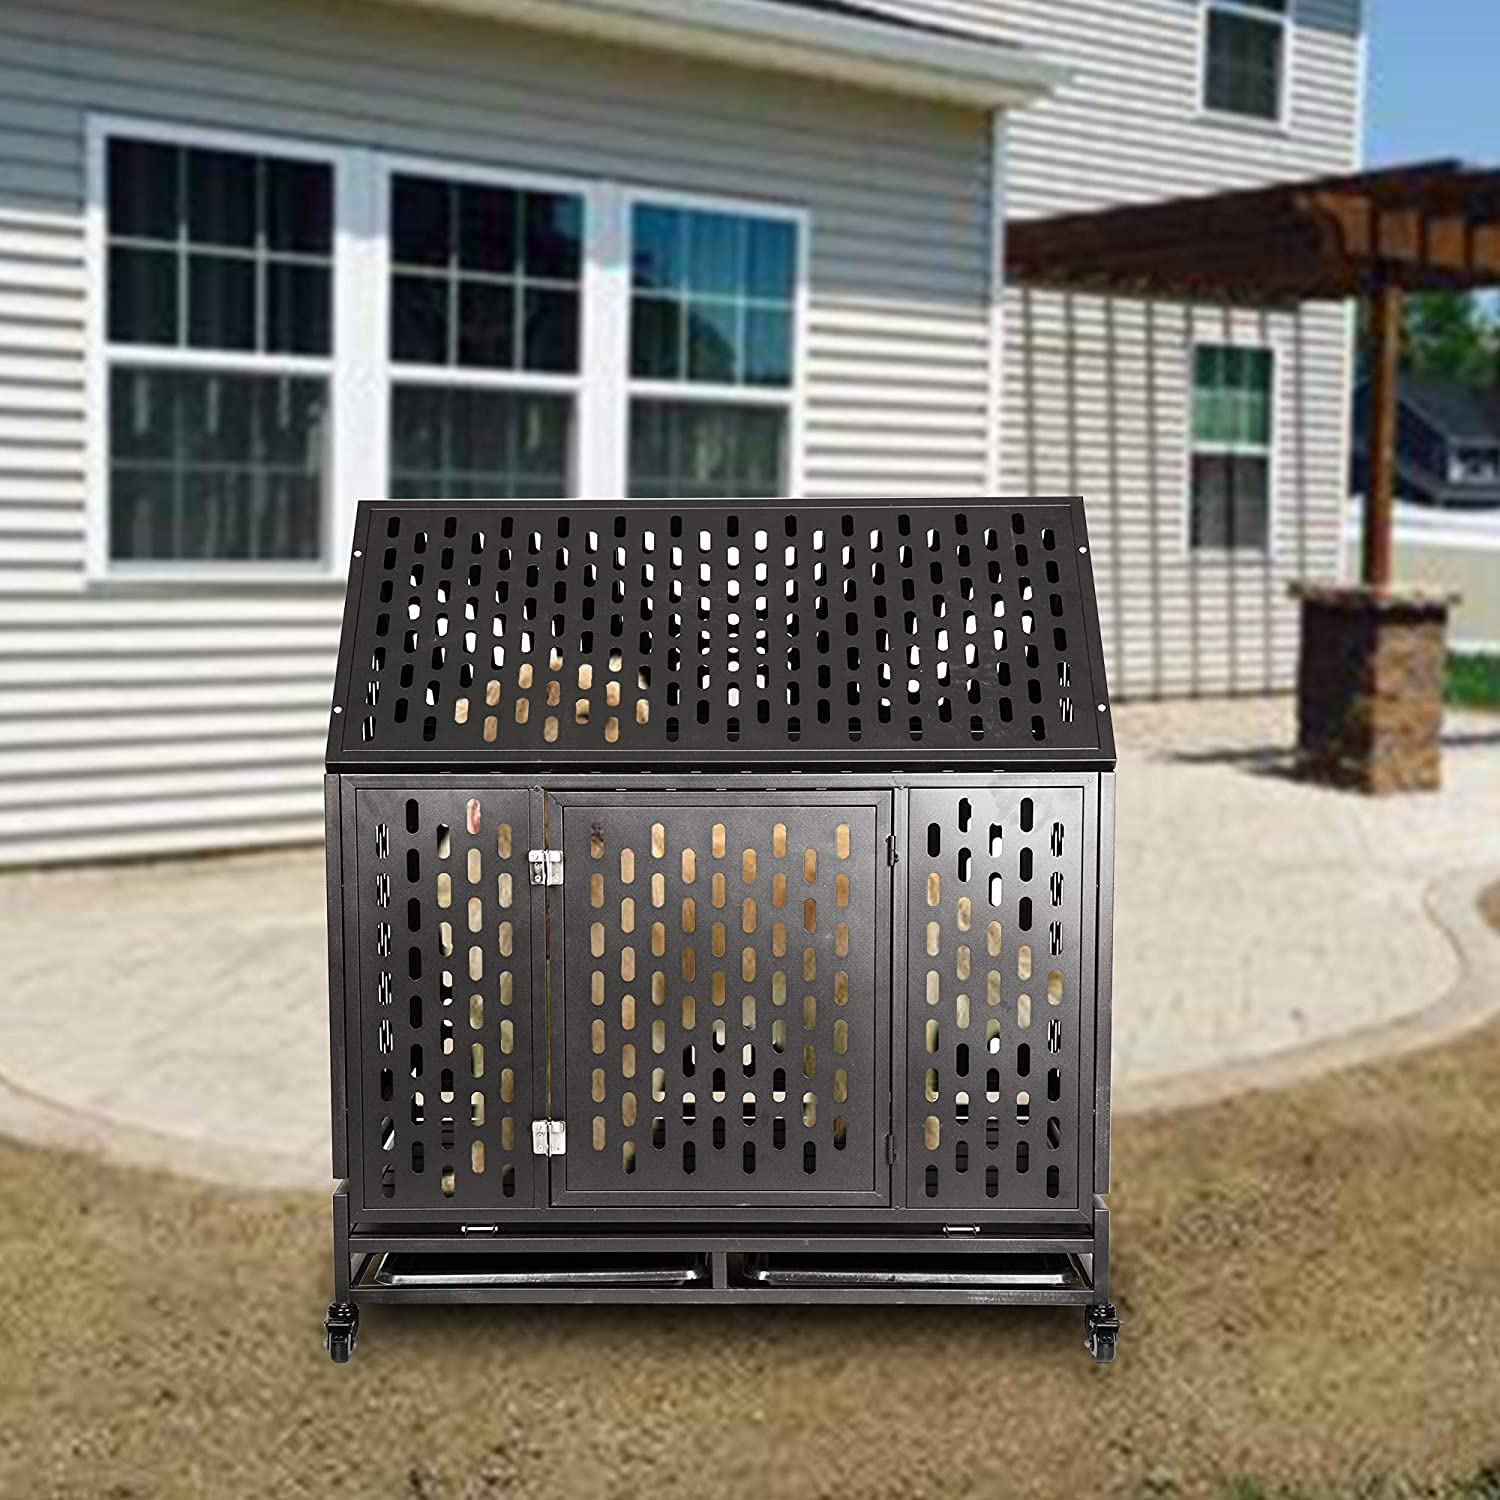 Haige Pet Your Pet Nanny Heavy Duty Dog Crate Cage Kennel Playpen Large Strong Metal for Large Dogs Cats with Two Prevent Escape Lock and Four Lockable Wheels